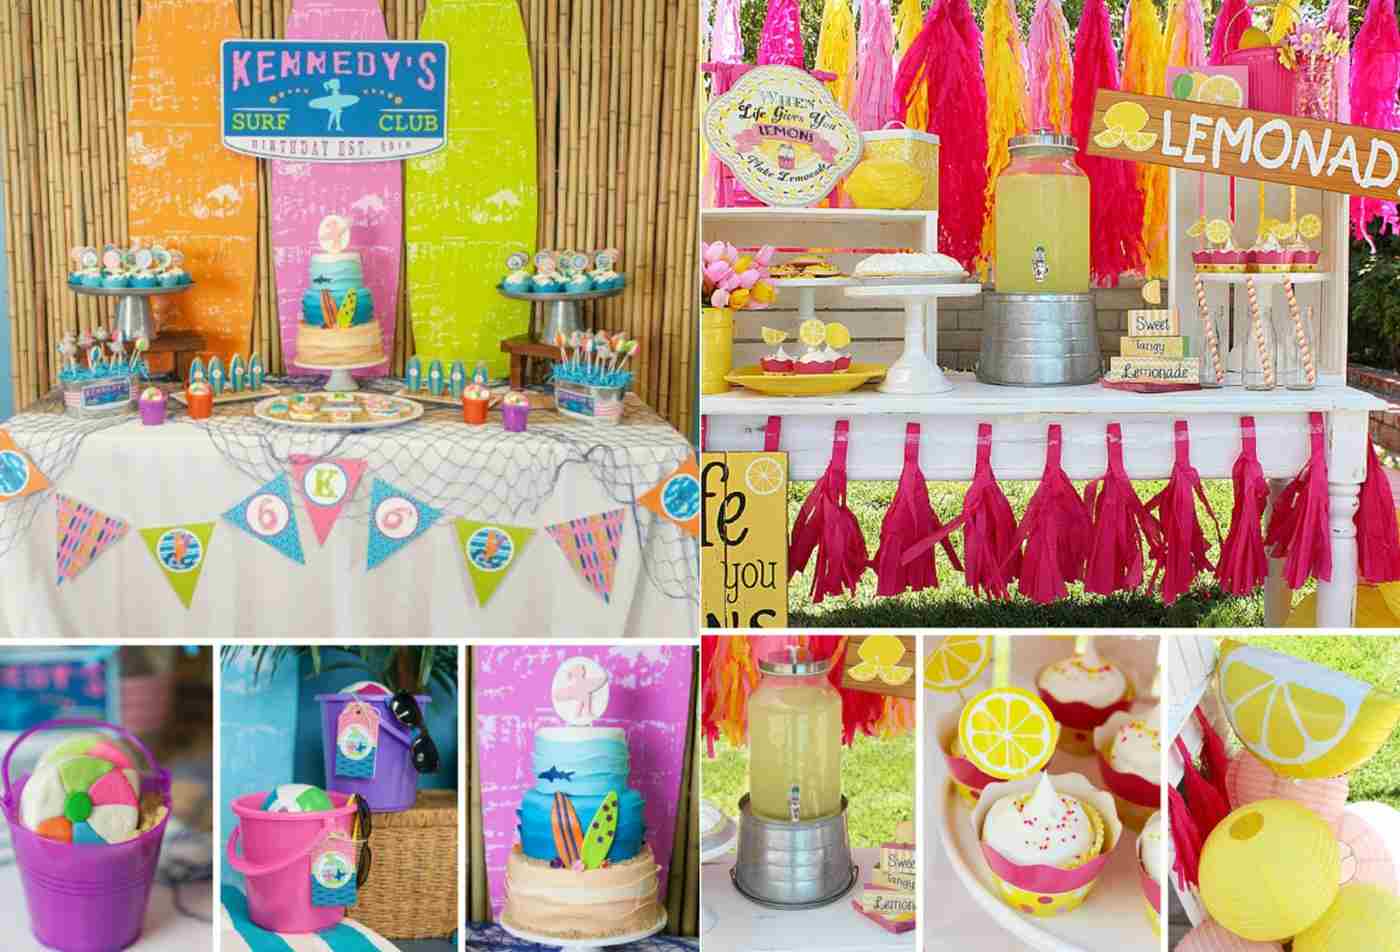 Ideas for the Pool Party to children 's birthday party in various colors